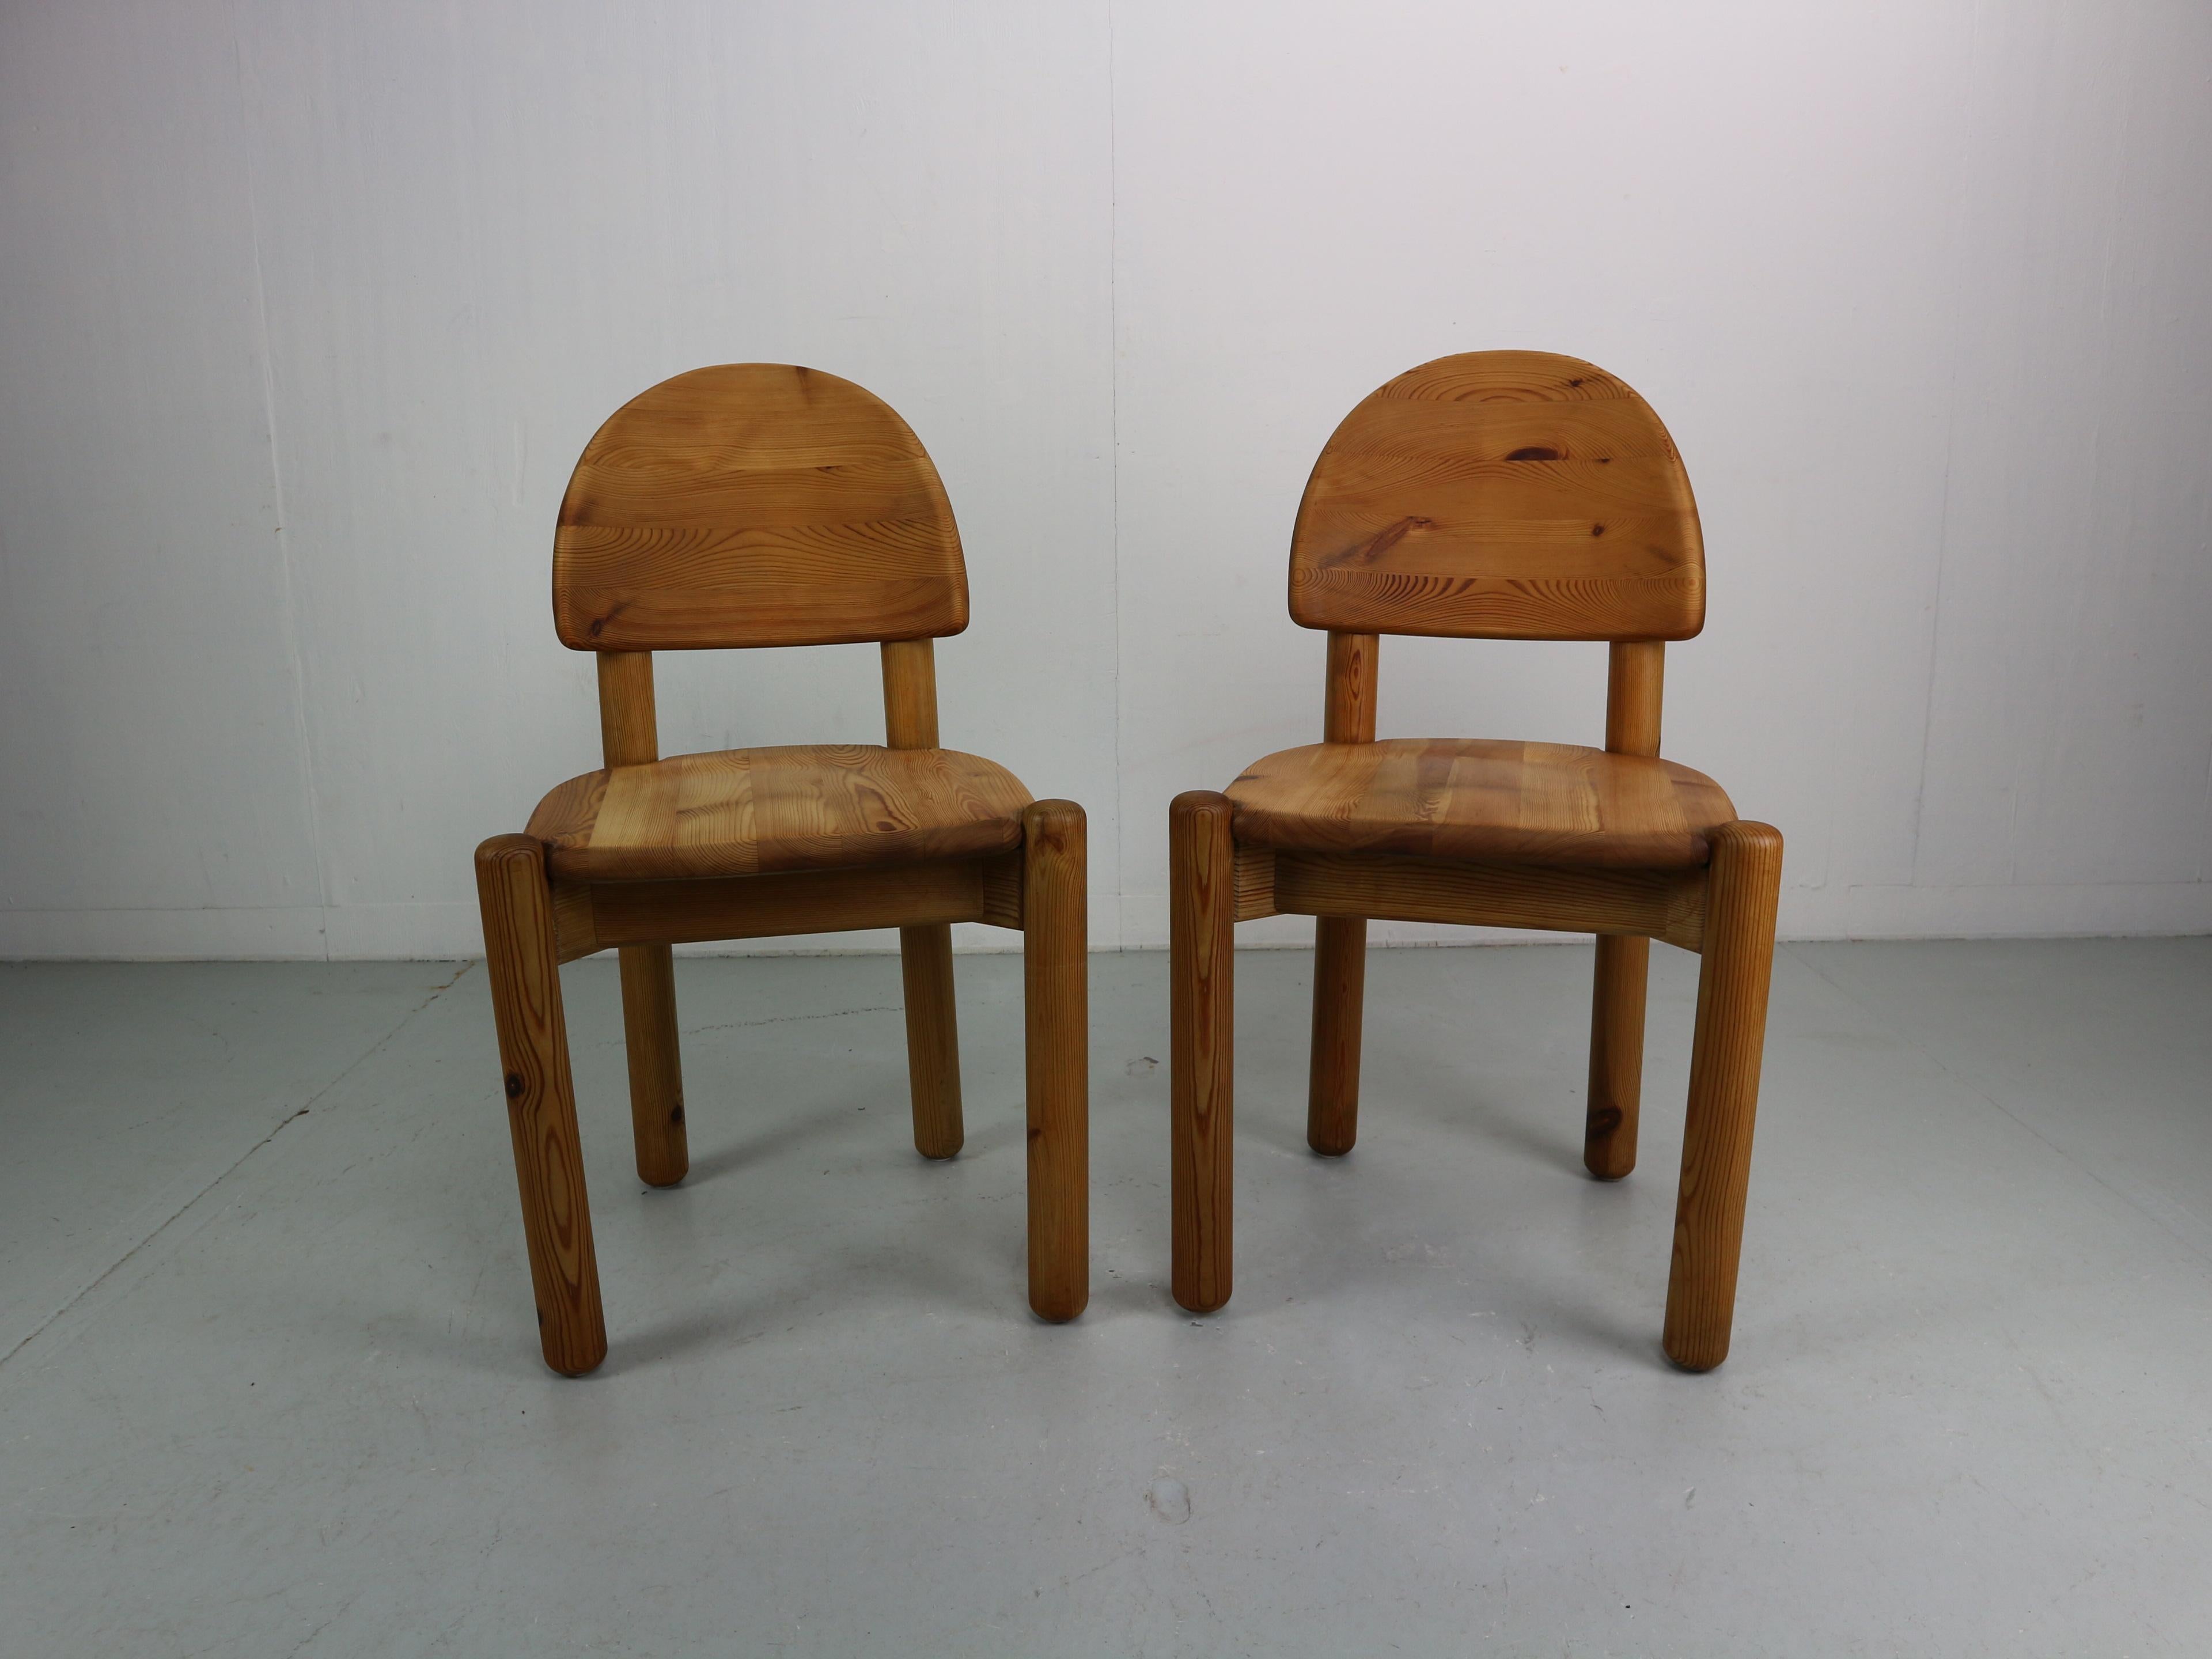 Set of two solid pine wood chairs in used condition. Designed by Rainer Daumiller and manufactured by Hirtshals Savvaerk in the 1970s. The chairs have a carved seat and backrest which give them a robust and organic appearance. The rustic pine wood